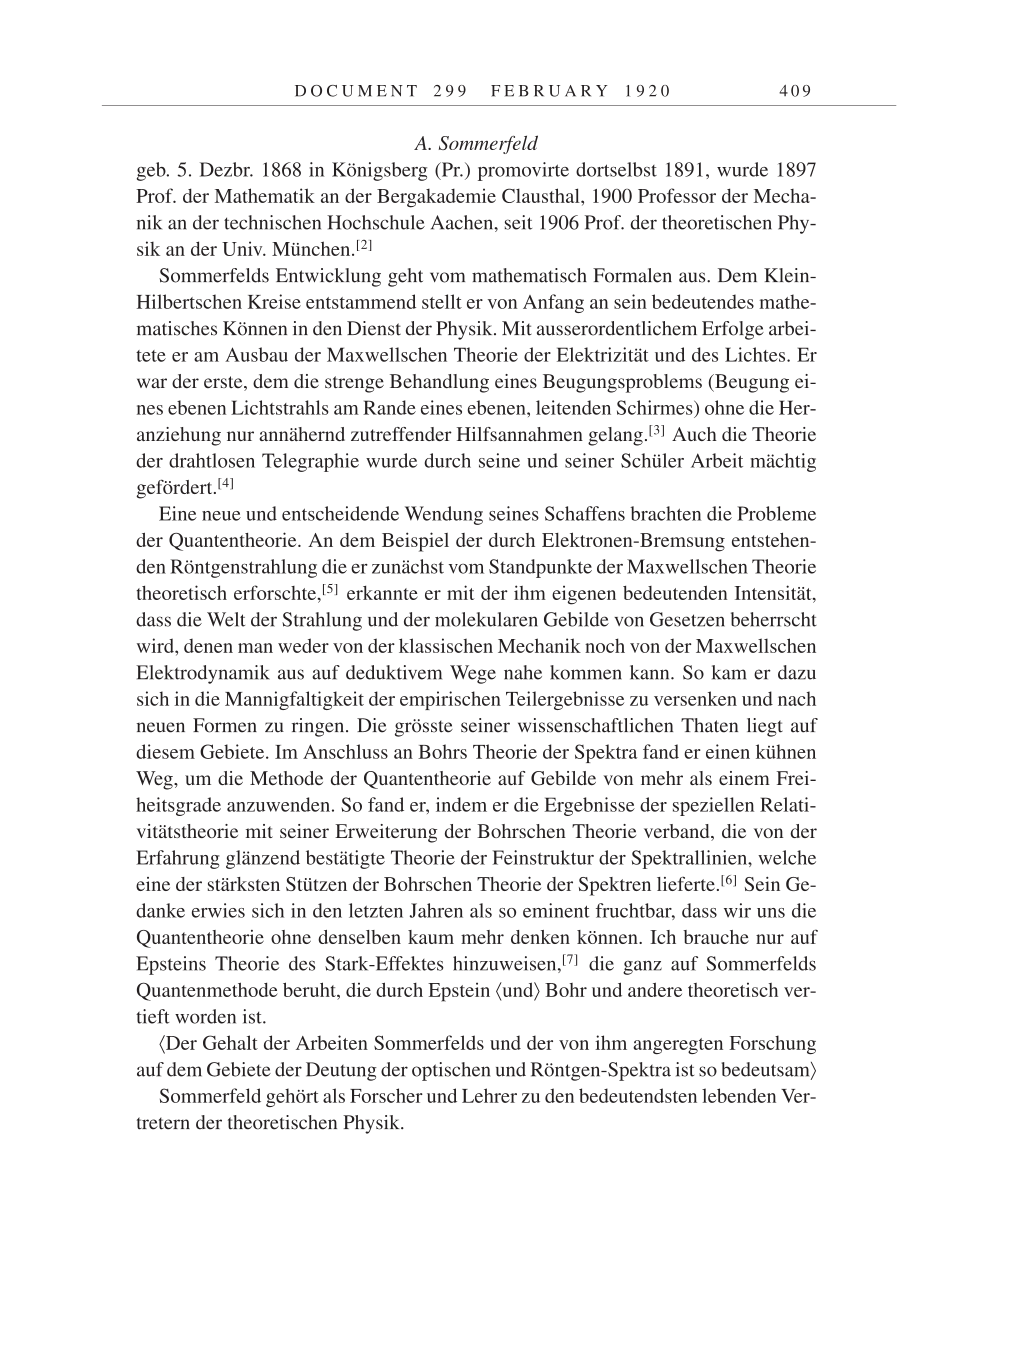 Volume 9: The Berlin Years: Correspondence January 1919-April 1920 page 409